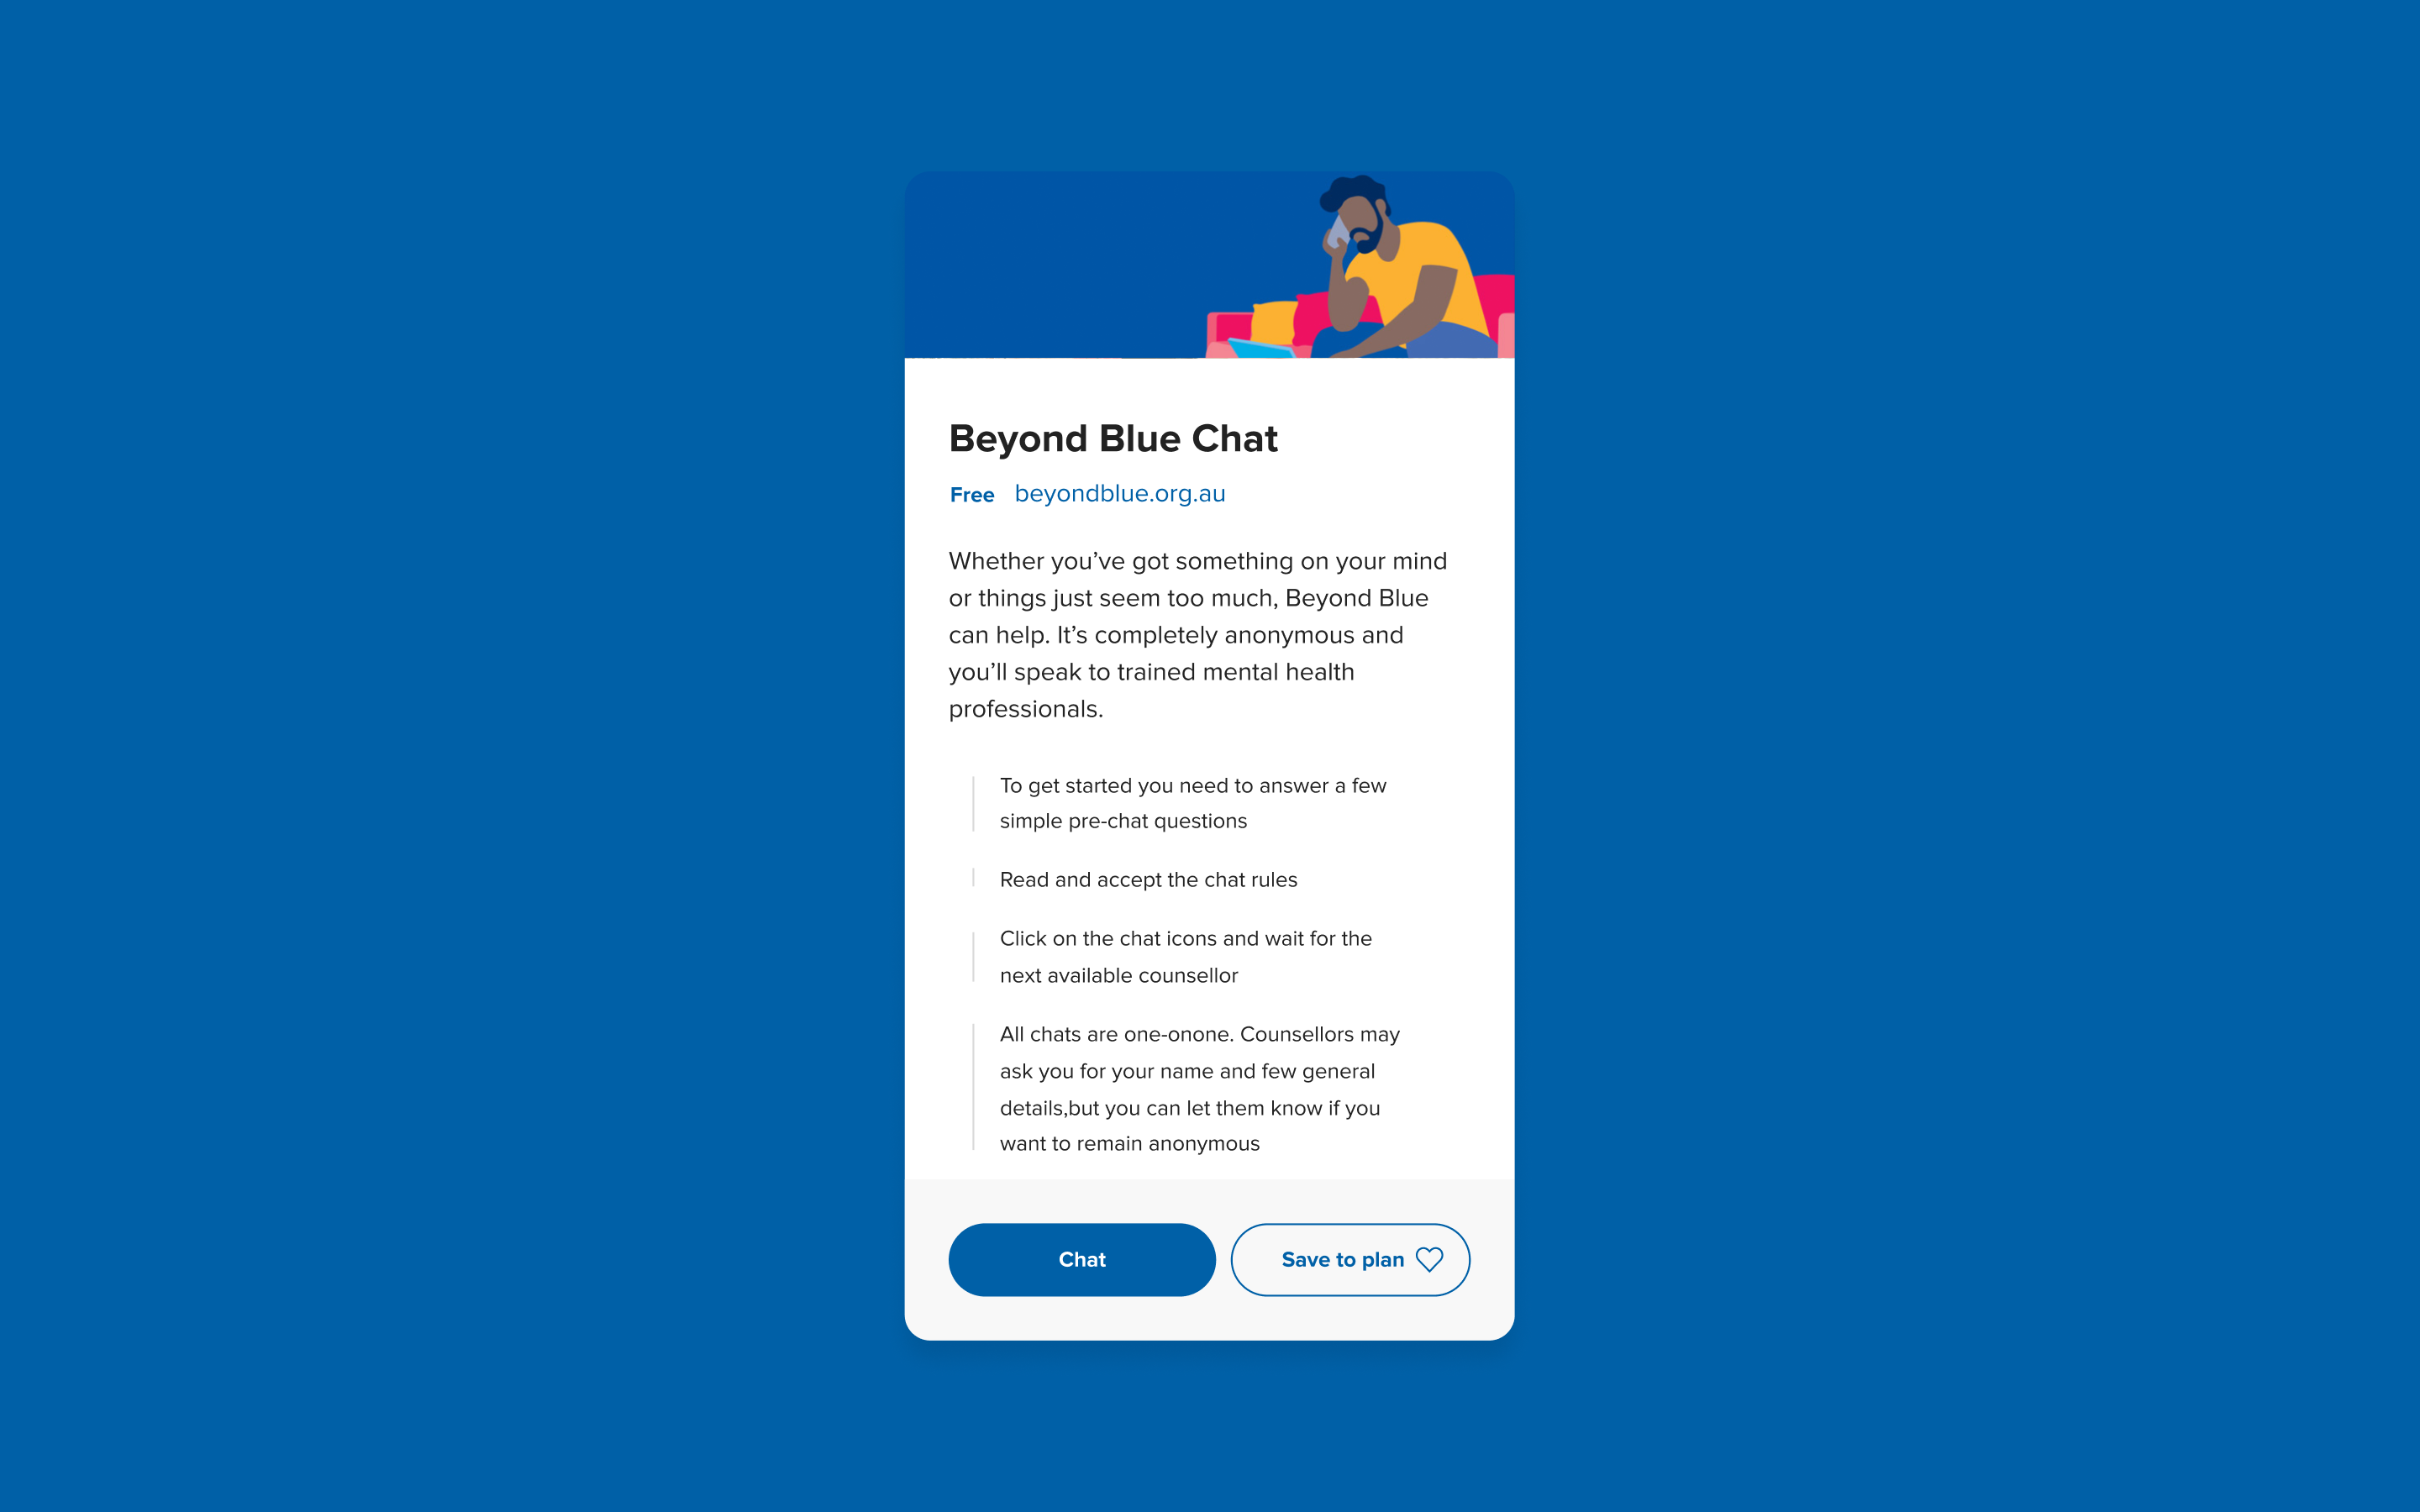 Next Step cards showcasing the Beyond Blue Chat support option